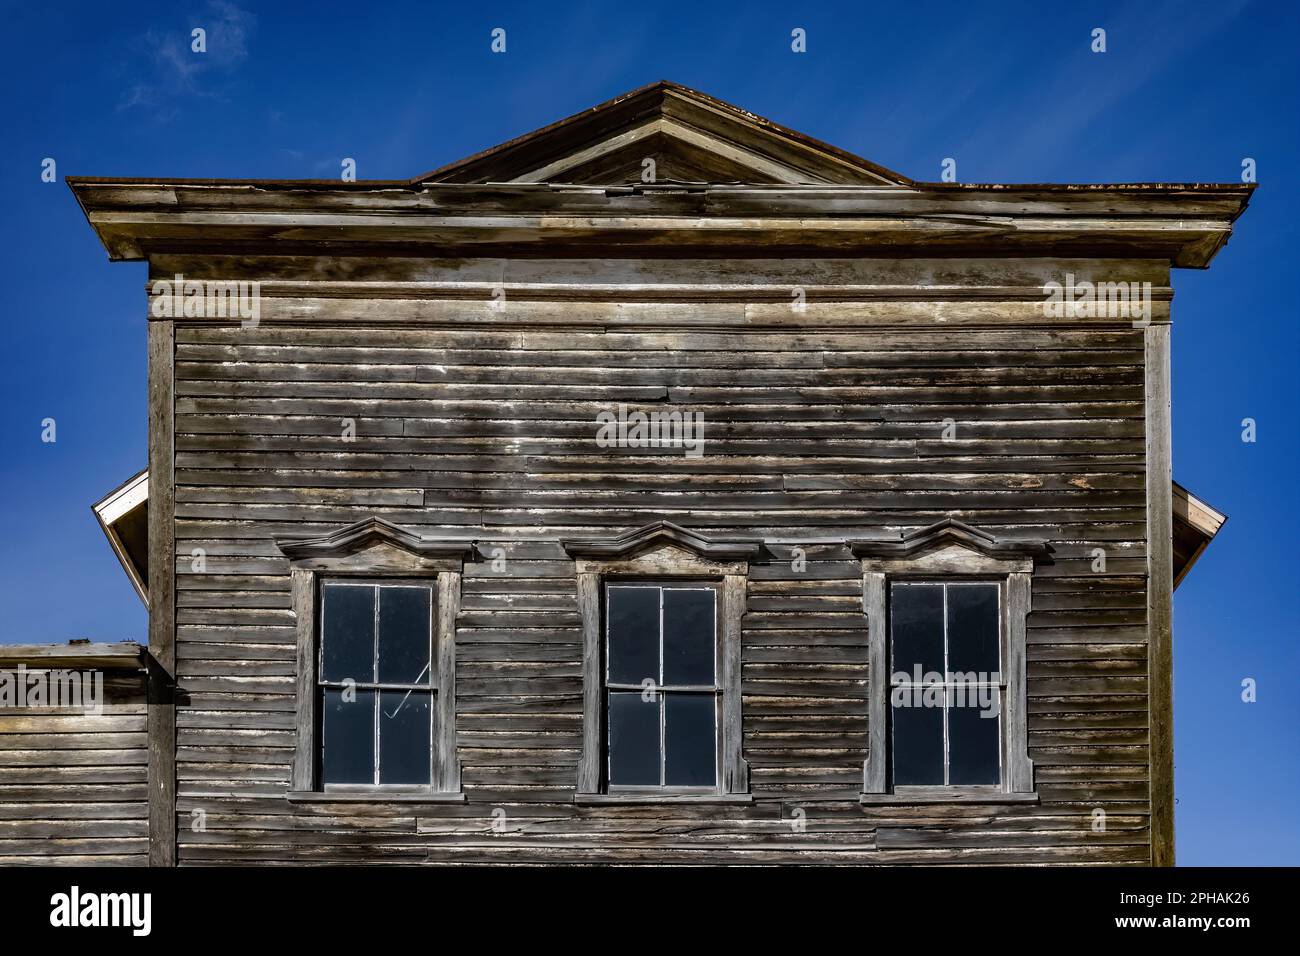 Old ghost town building in the village of Michigamme in the Upper Peninsula, Michigan, USA [No property release; editorial licensing only] Stock Photo